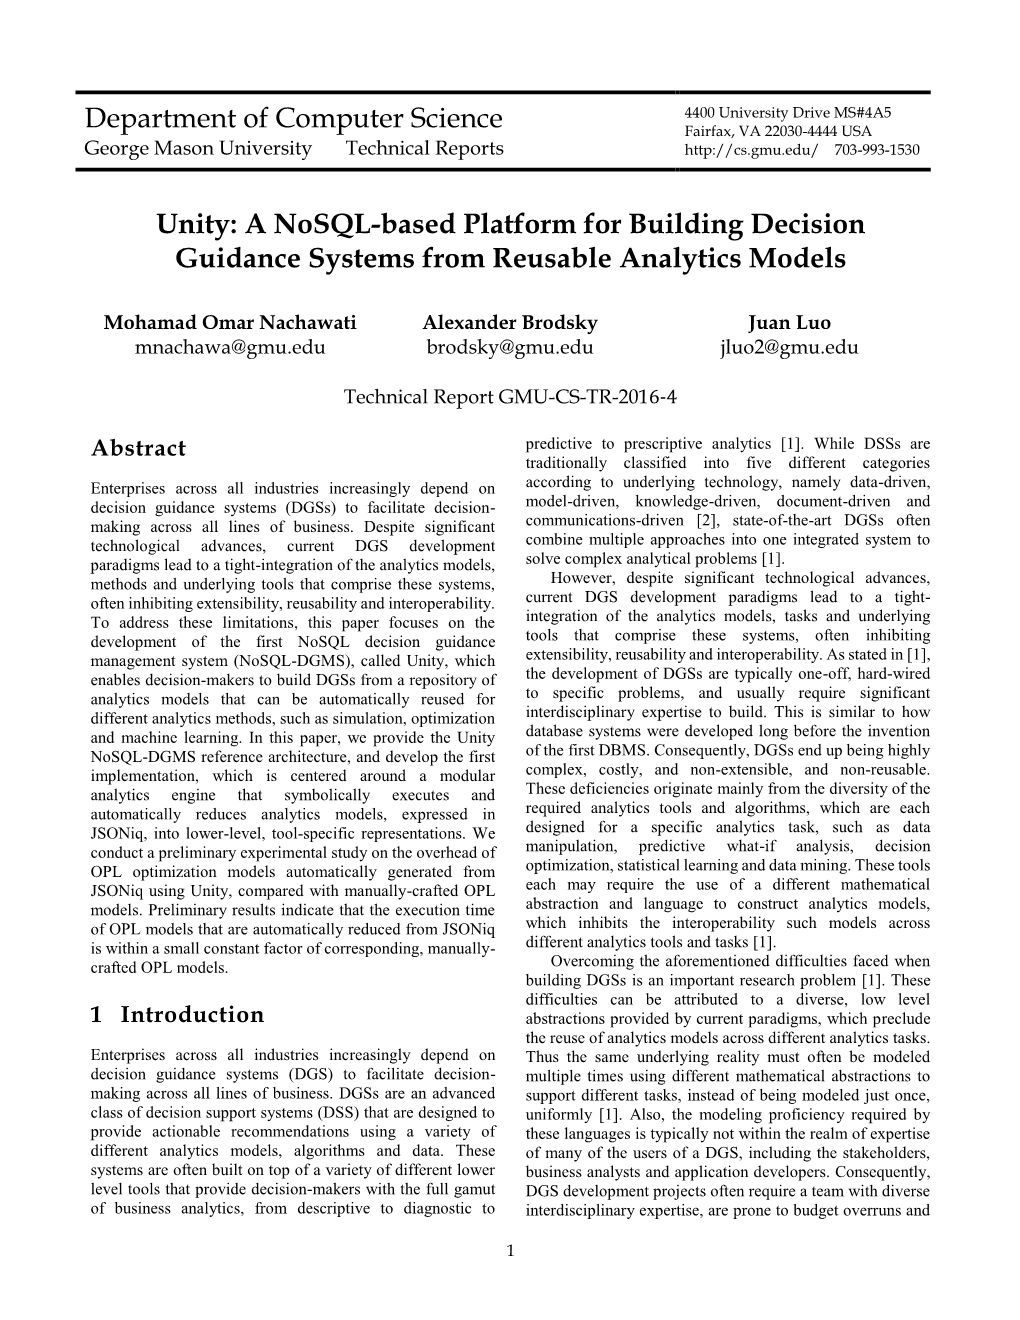 A Nosql-Based Platform for Building Decision Guidance Systems from Reusable Analytics Models